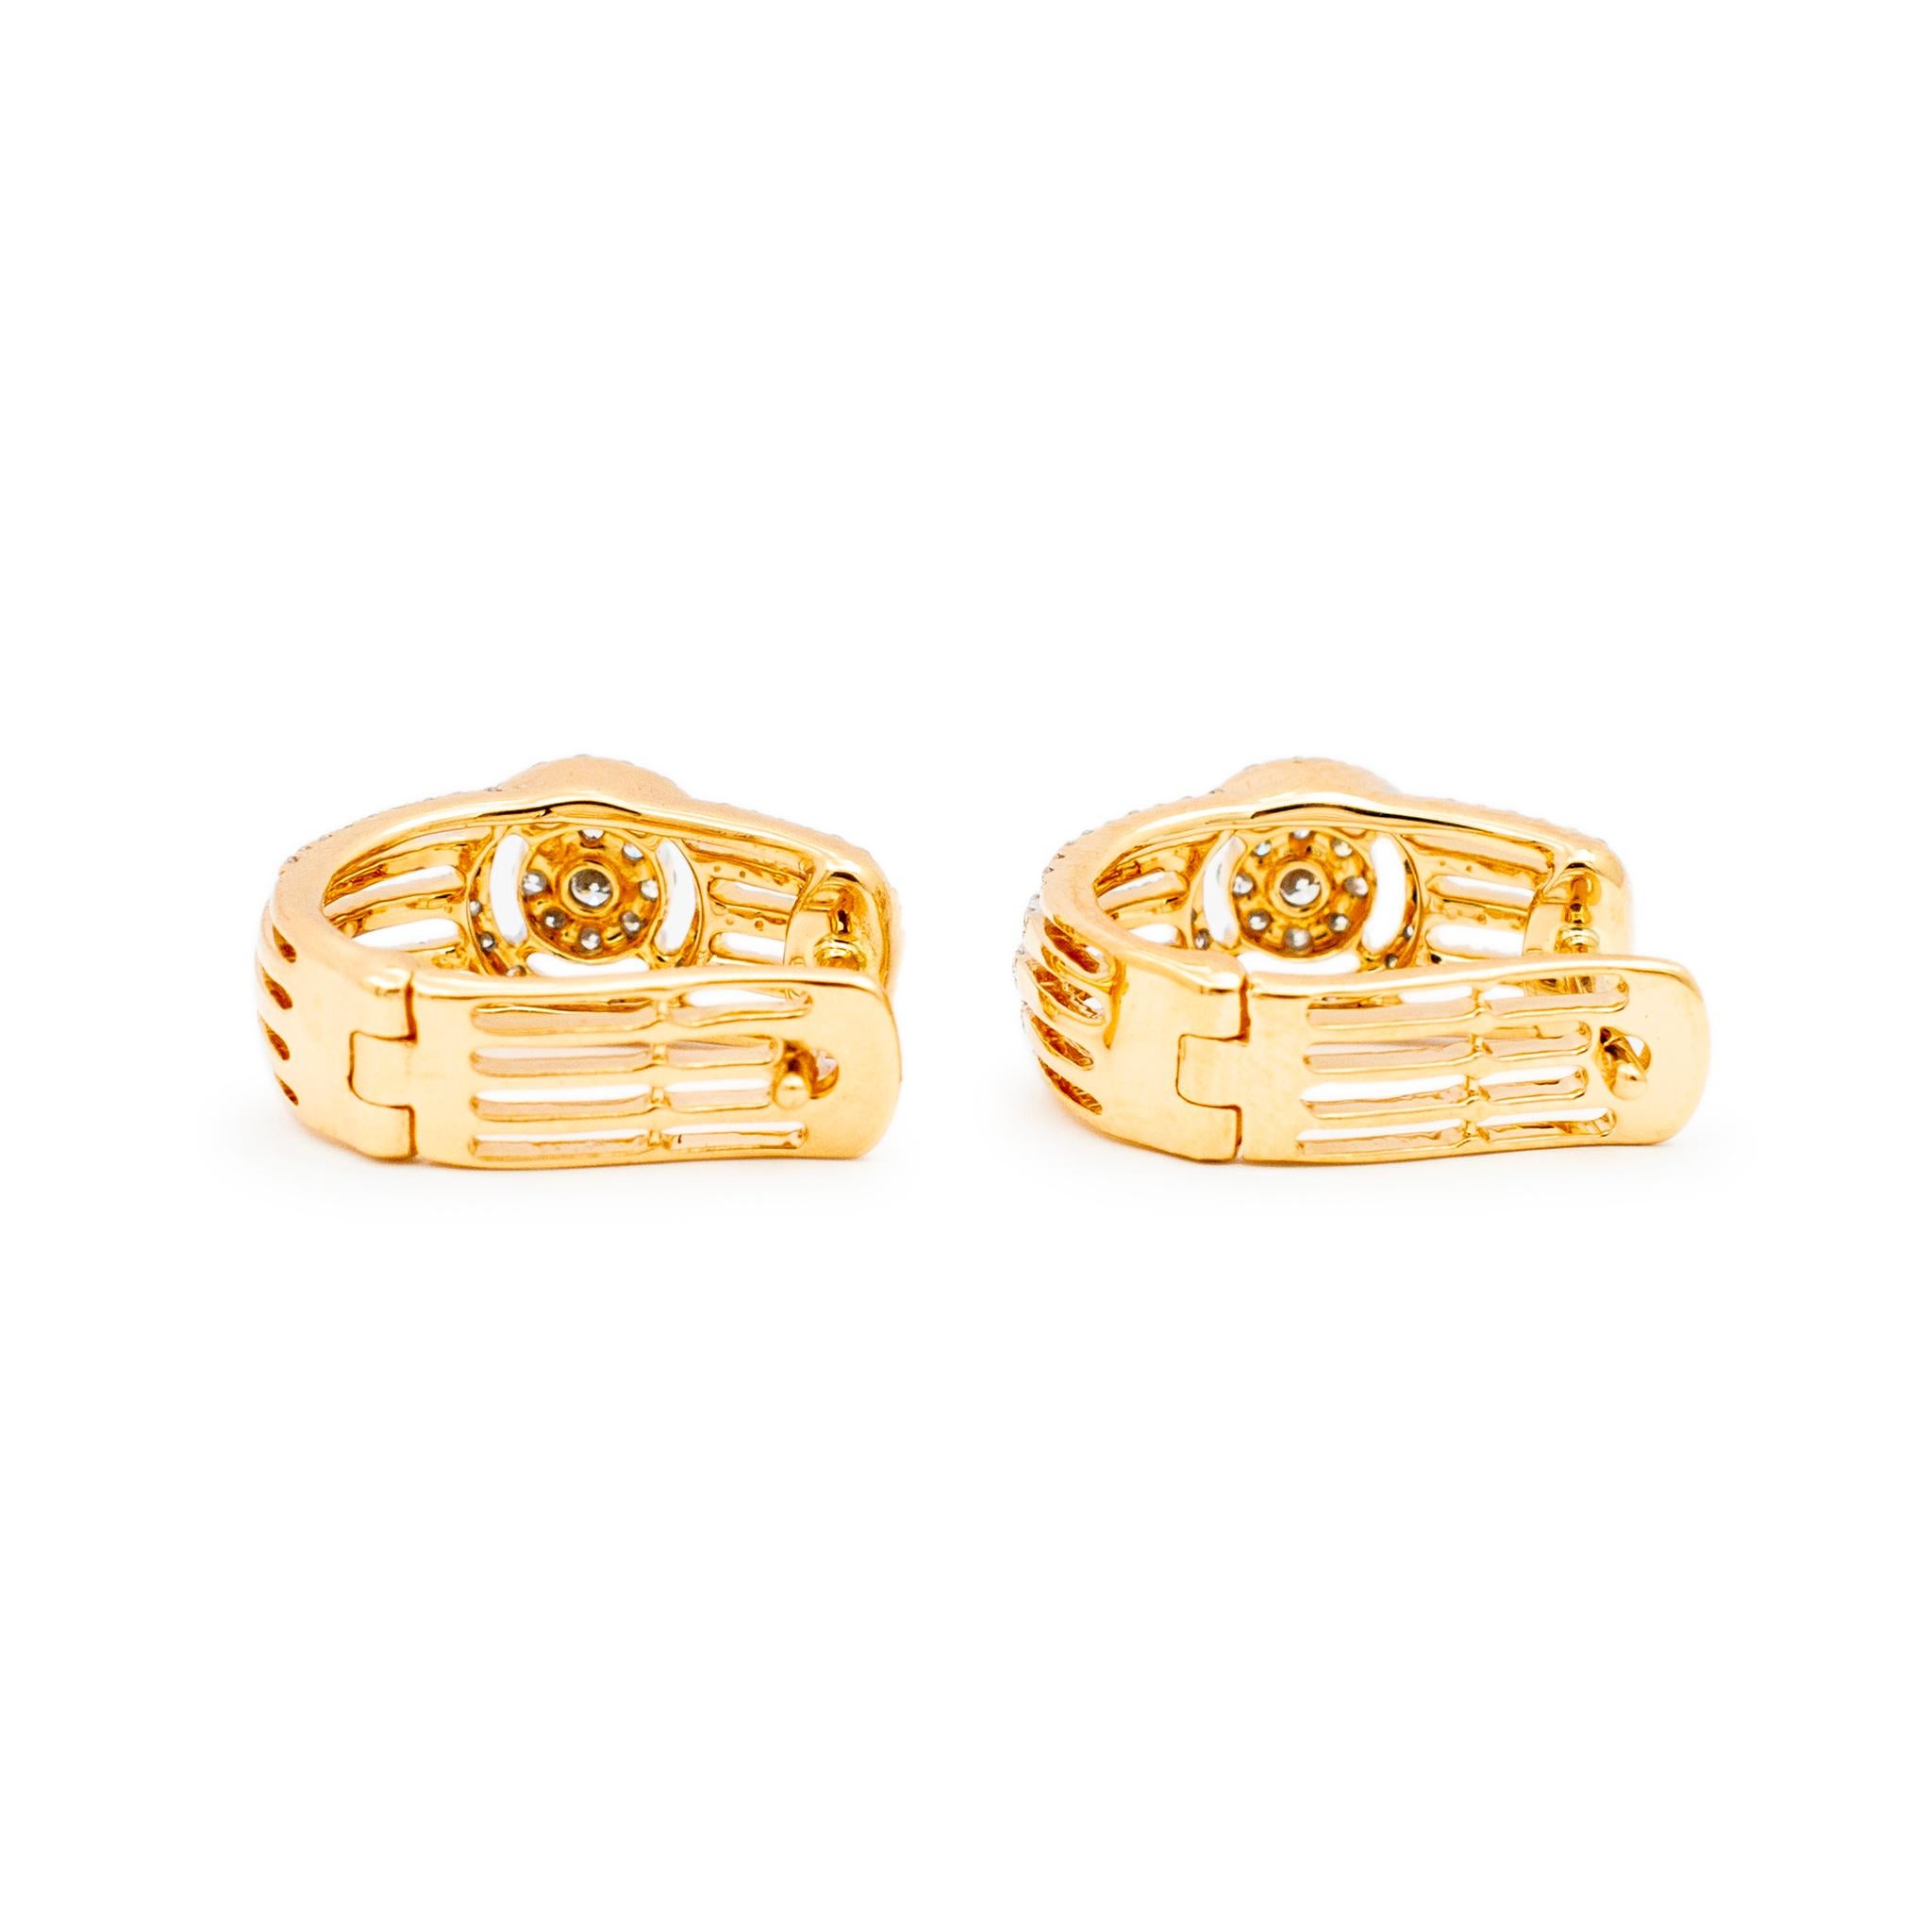 Gender: Ladies

Metal Type: 18K White Gold

Length: 0.75 inches

Width: 14.55 mm

Weight: 6.40 grams 


Ladies 18K yellow gold diamond huggie style cluster earrings with 